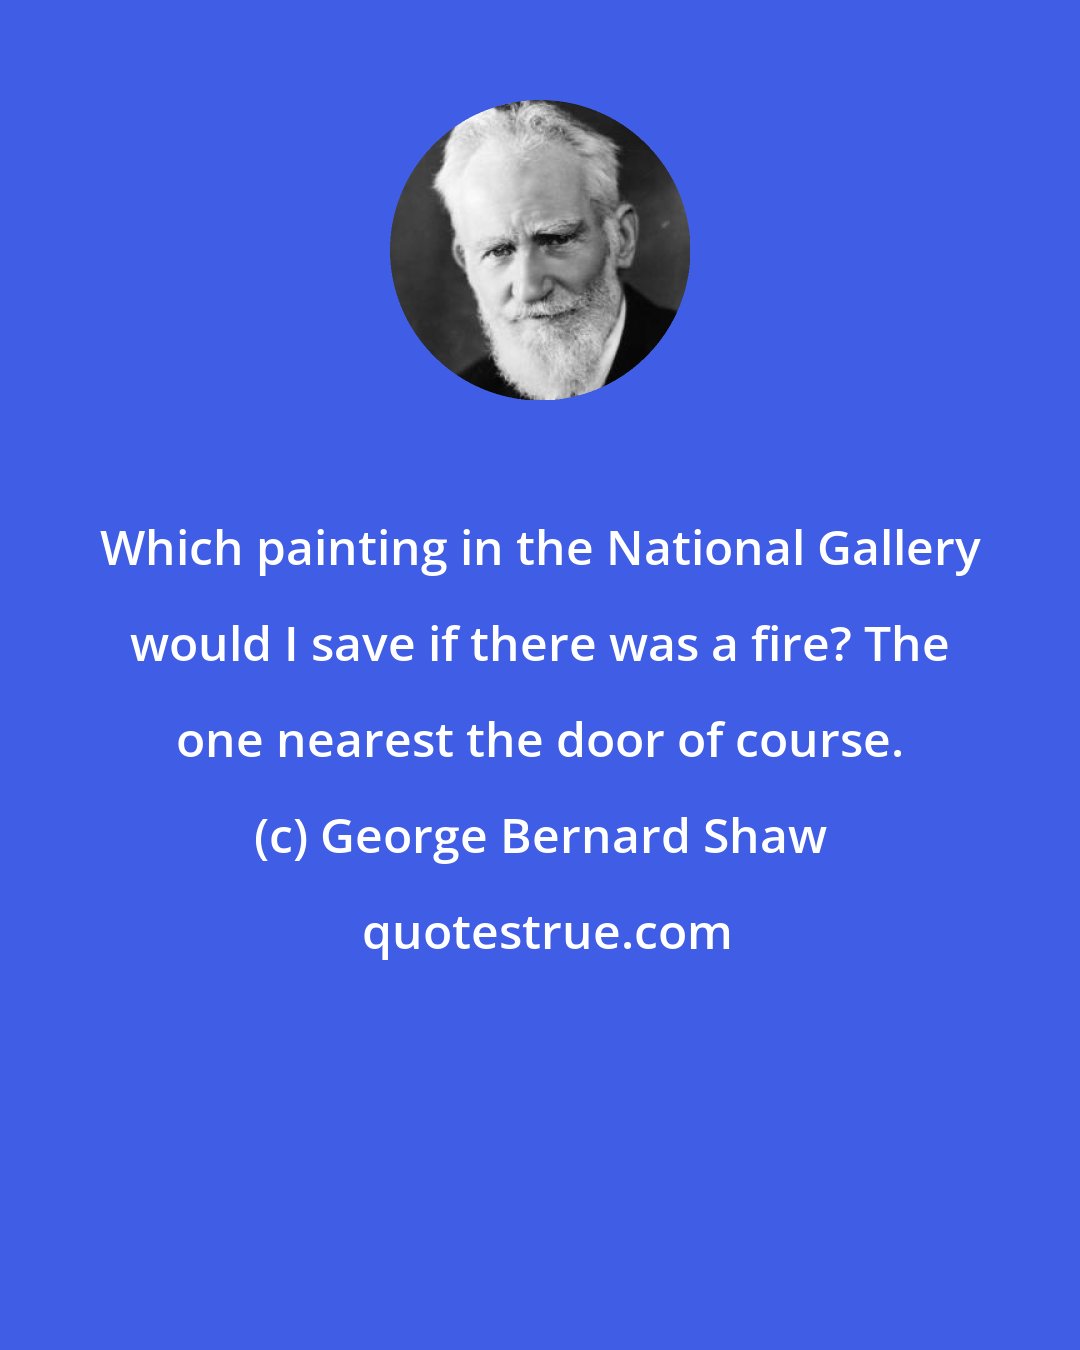 George Bernard Shaw: Which painting in the National Gallery would I save if there was a fire? The one nearest the door of course.